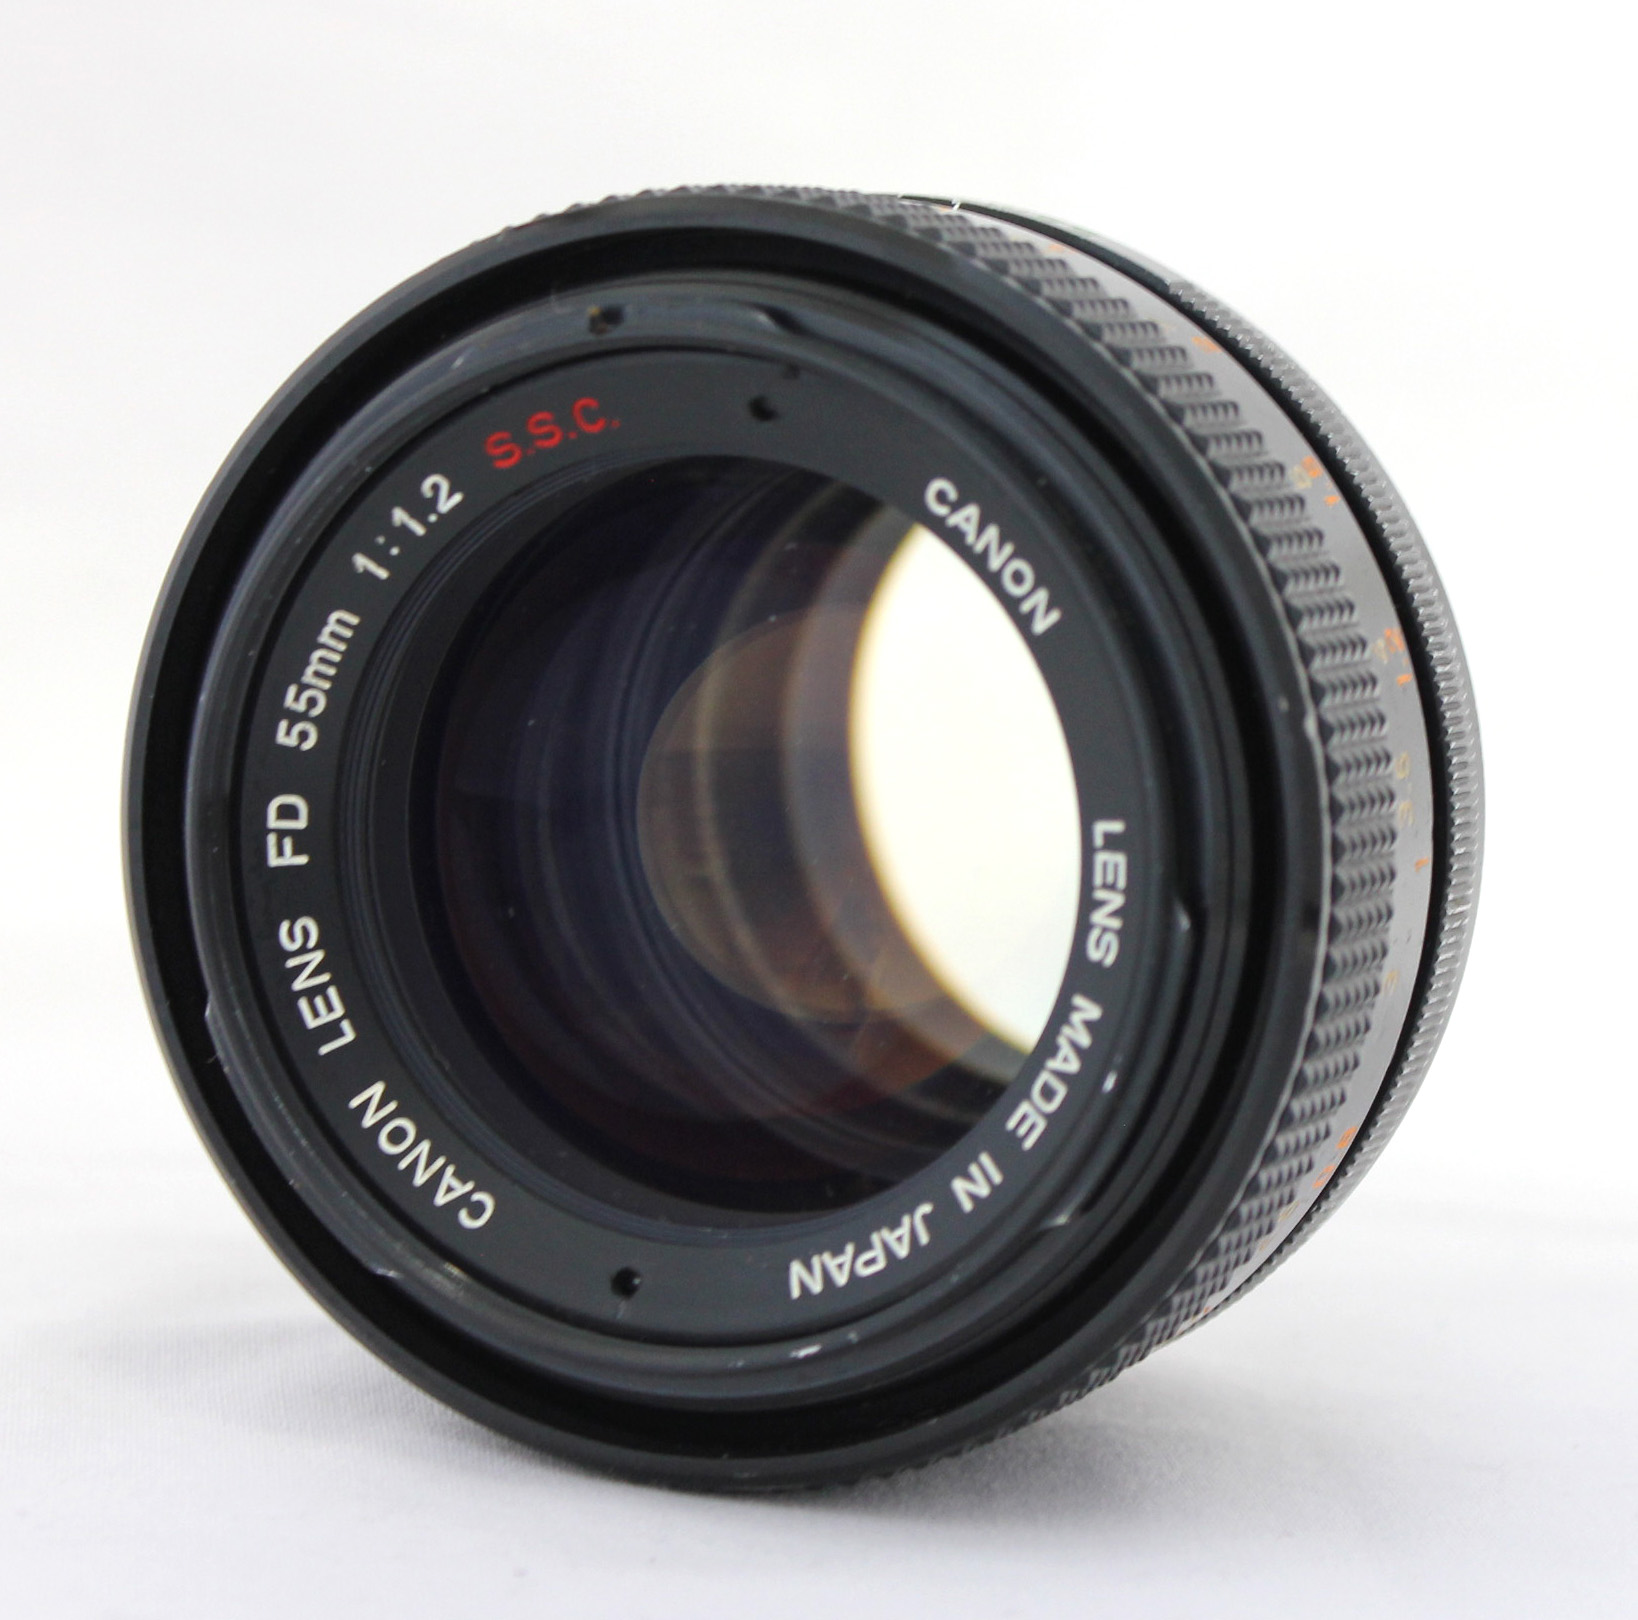 Japan Used Camera Shop | [Rare "O"] Canon FD 55mm F/1.2 S.S.C. ssc MF Standard Prime Lens from Japan